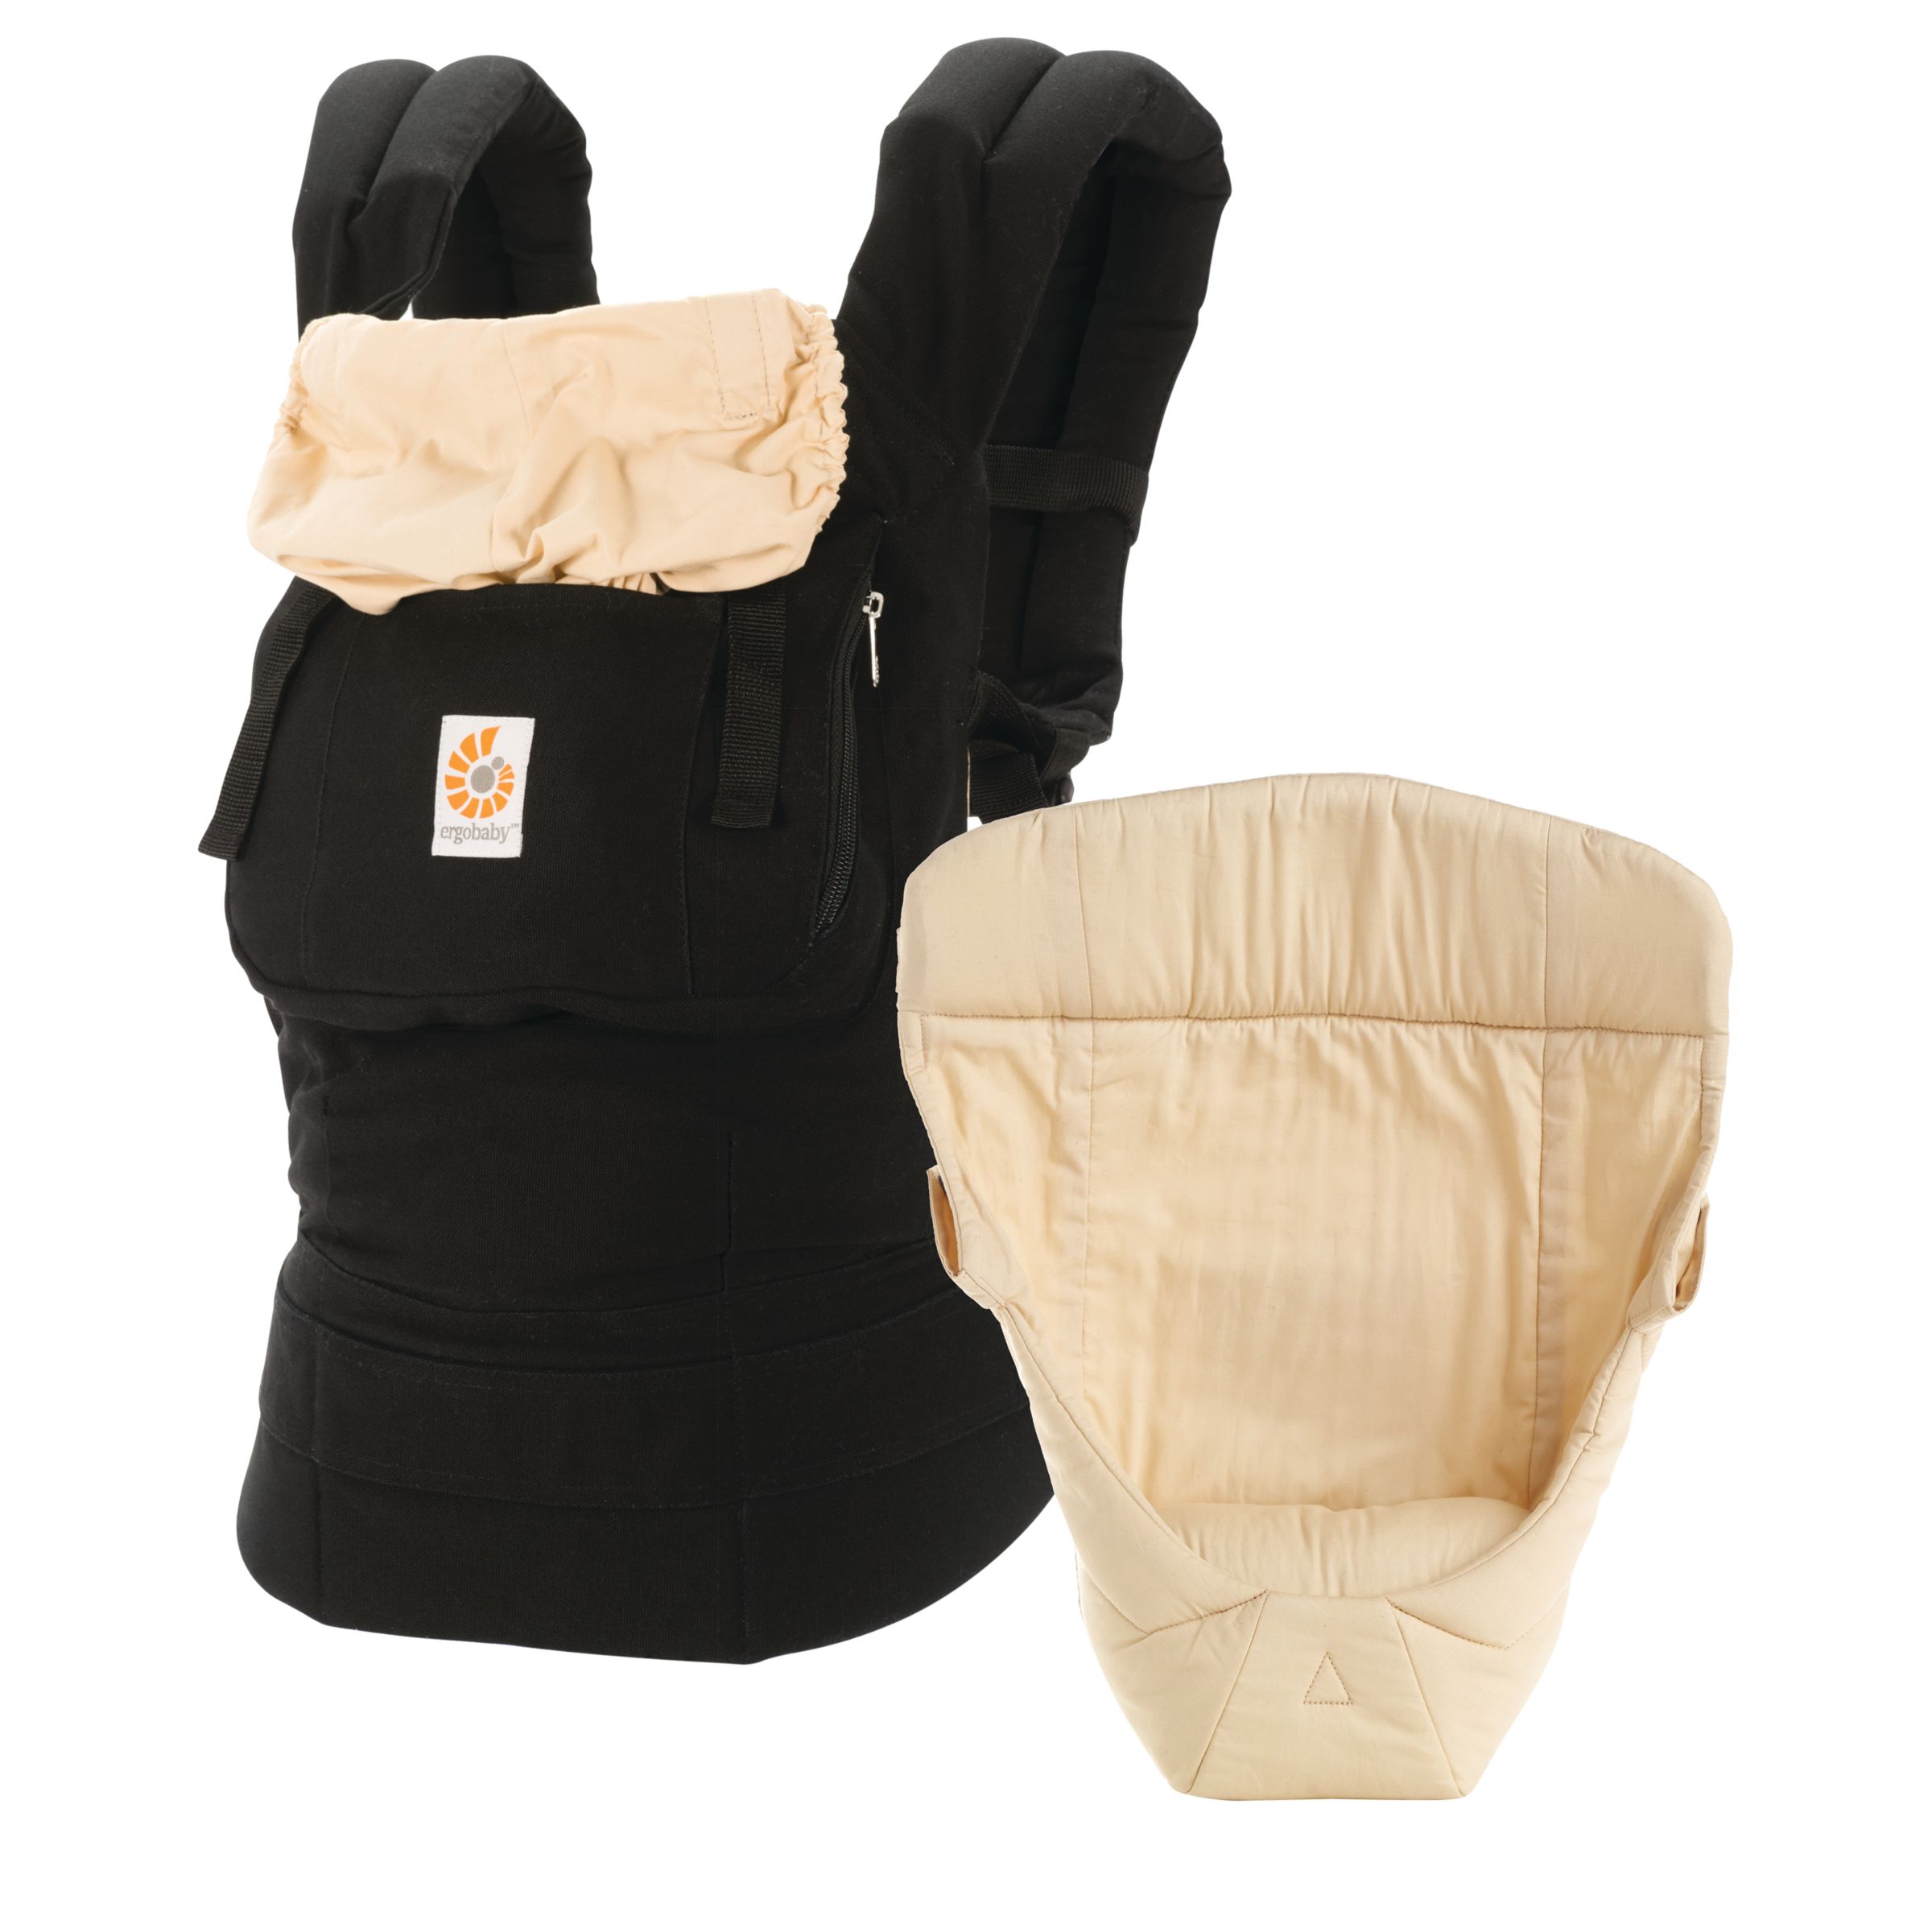 ergobaby classic baby carrier